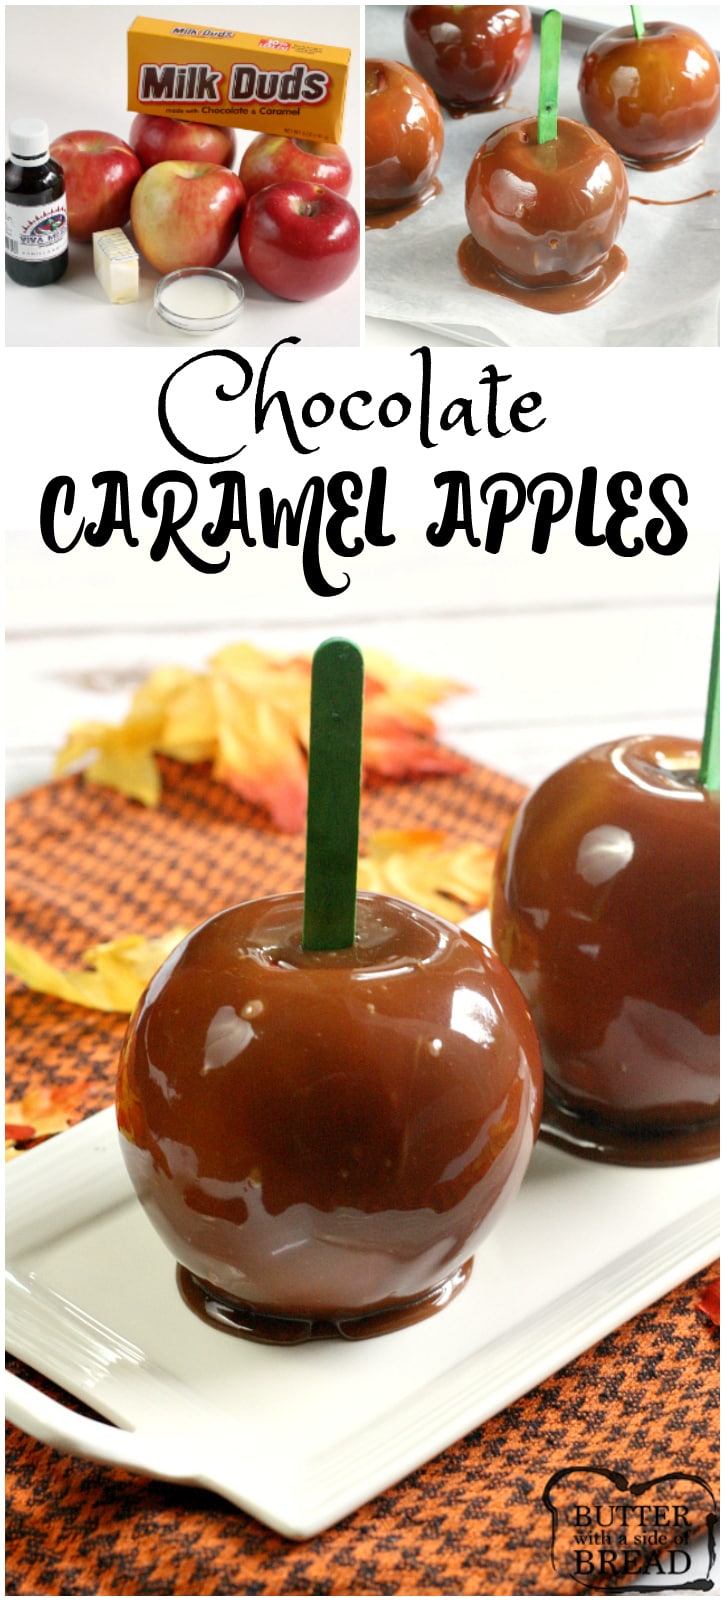 Chocolate Caramel Apples are made with melted Milk Duds adding chocolate flavor to classic caramel coated apples! Perfect for Halloween or any Fall party! 